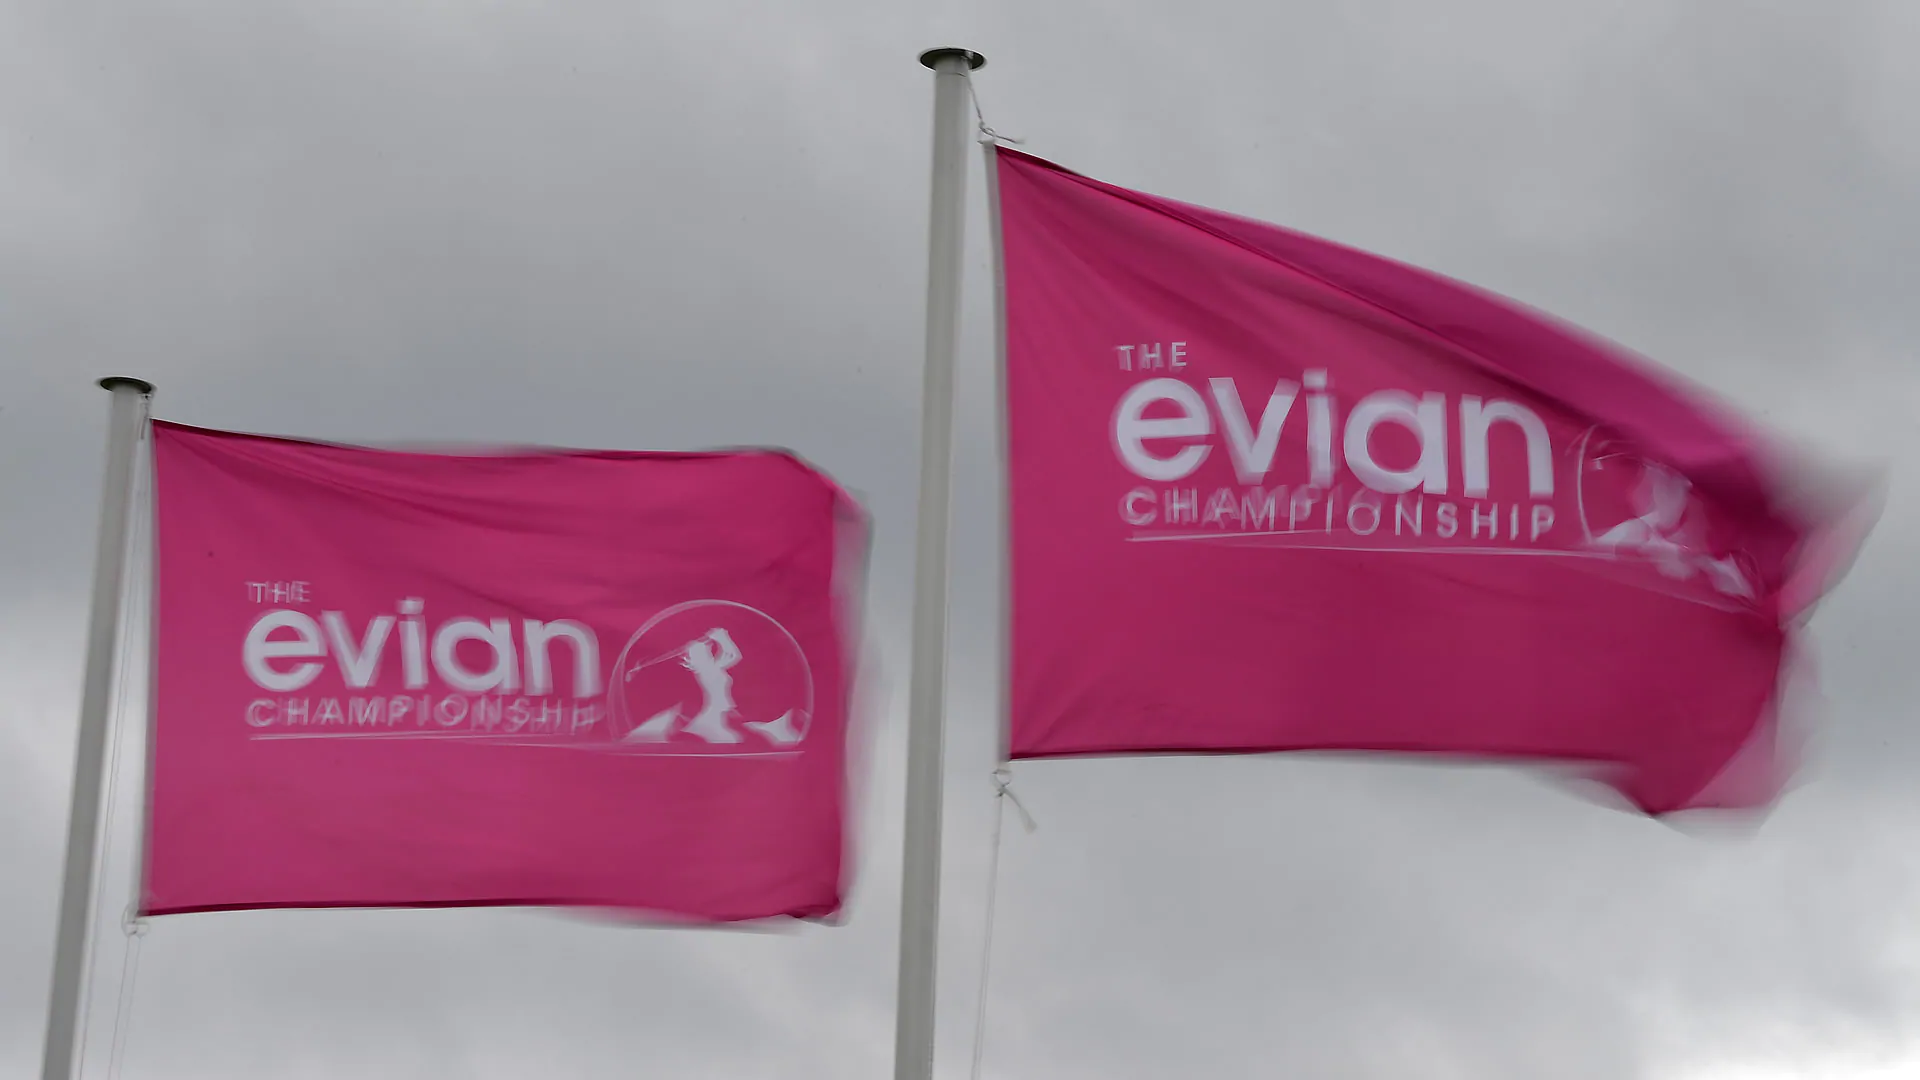 After years of weather issues, Evian moves 2019 date